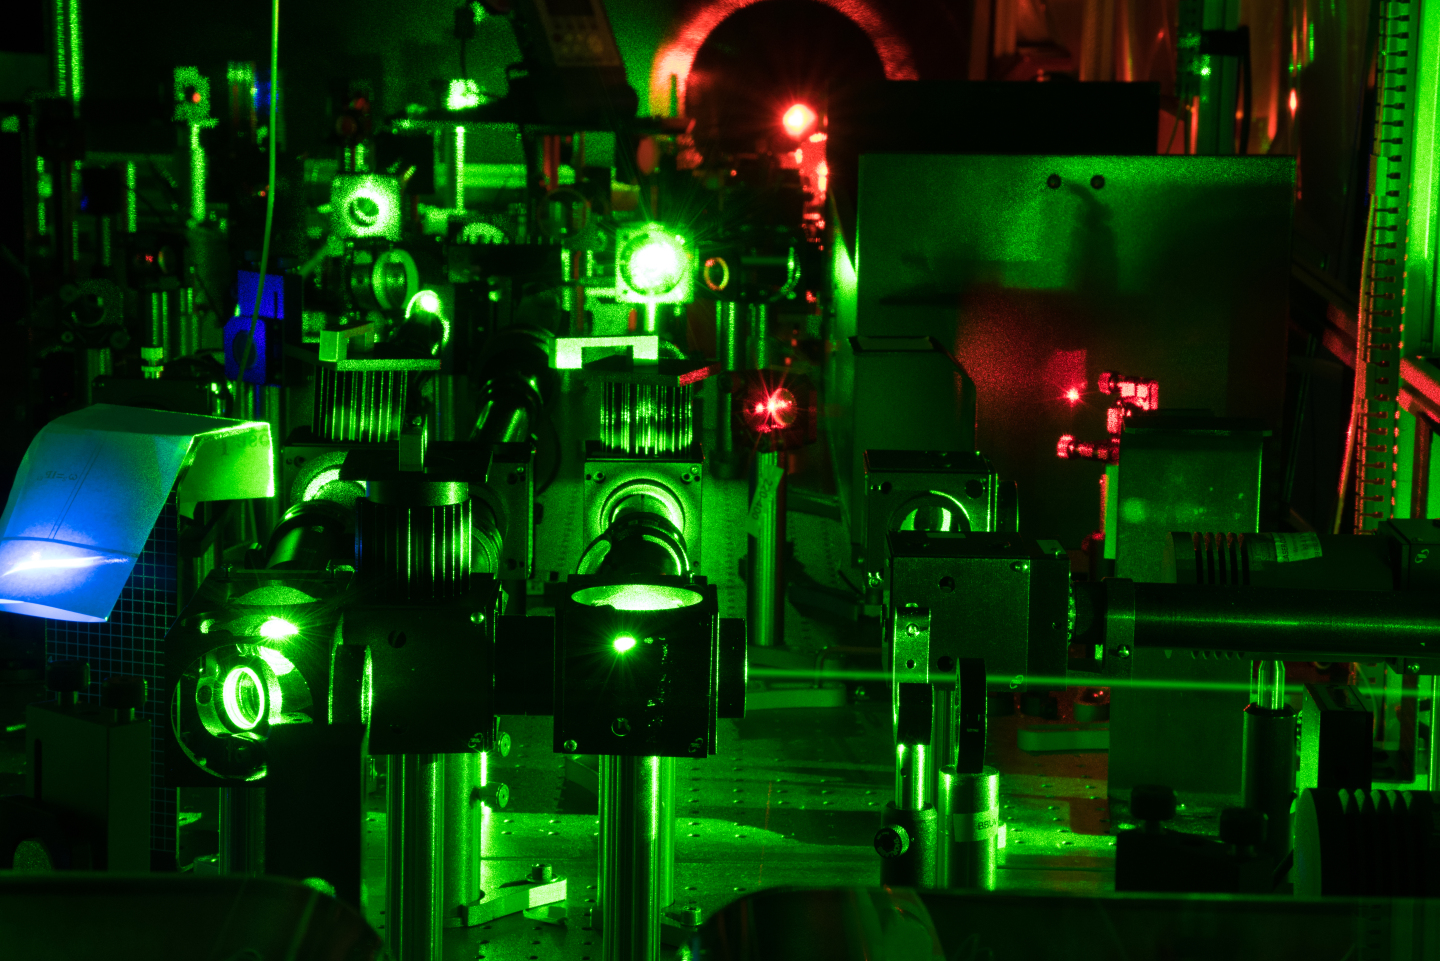 ISOLDE’s resonant ionisation laser ion source (RILIS) provided the first beams of neutron-rich chromium isotopes to the ISOLTRAP precision balance. (Image: Noemí Carabán González/CERN)